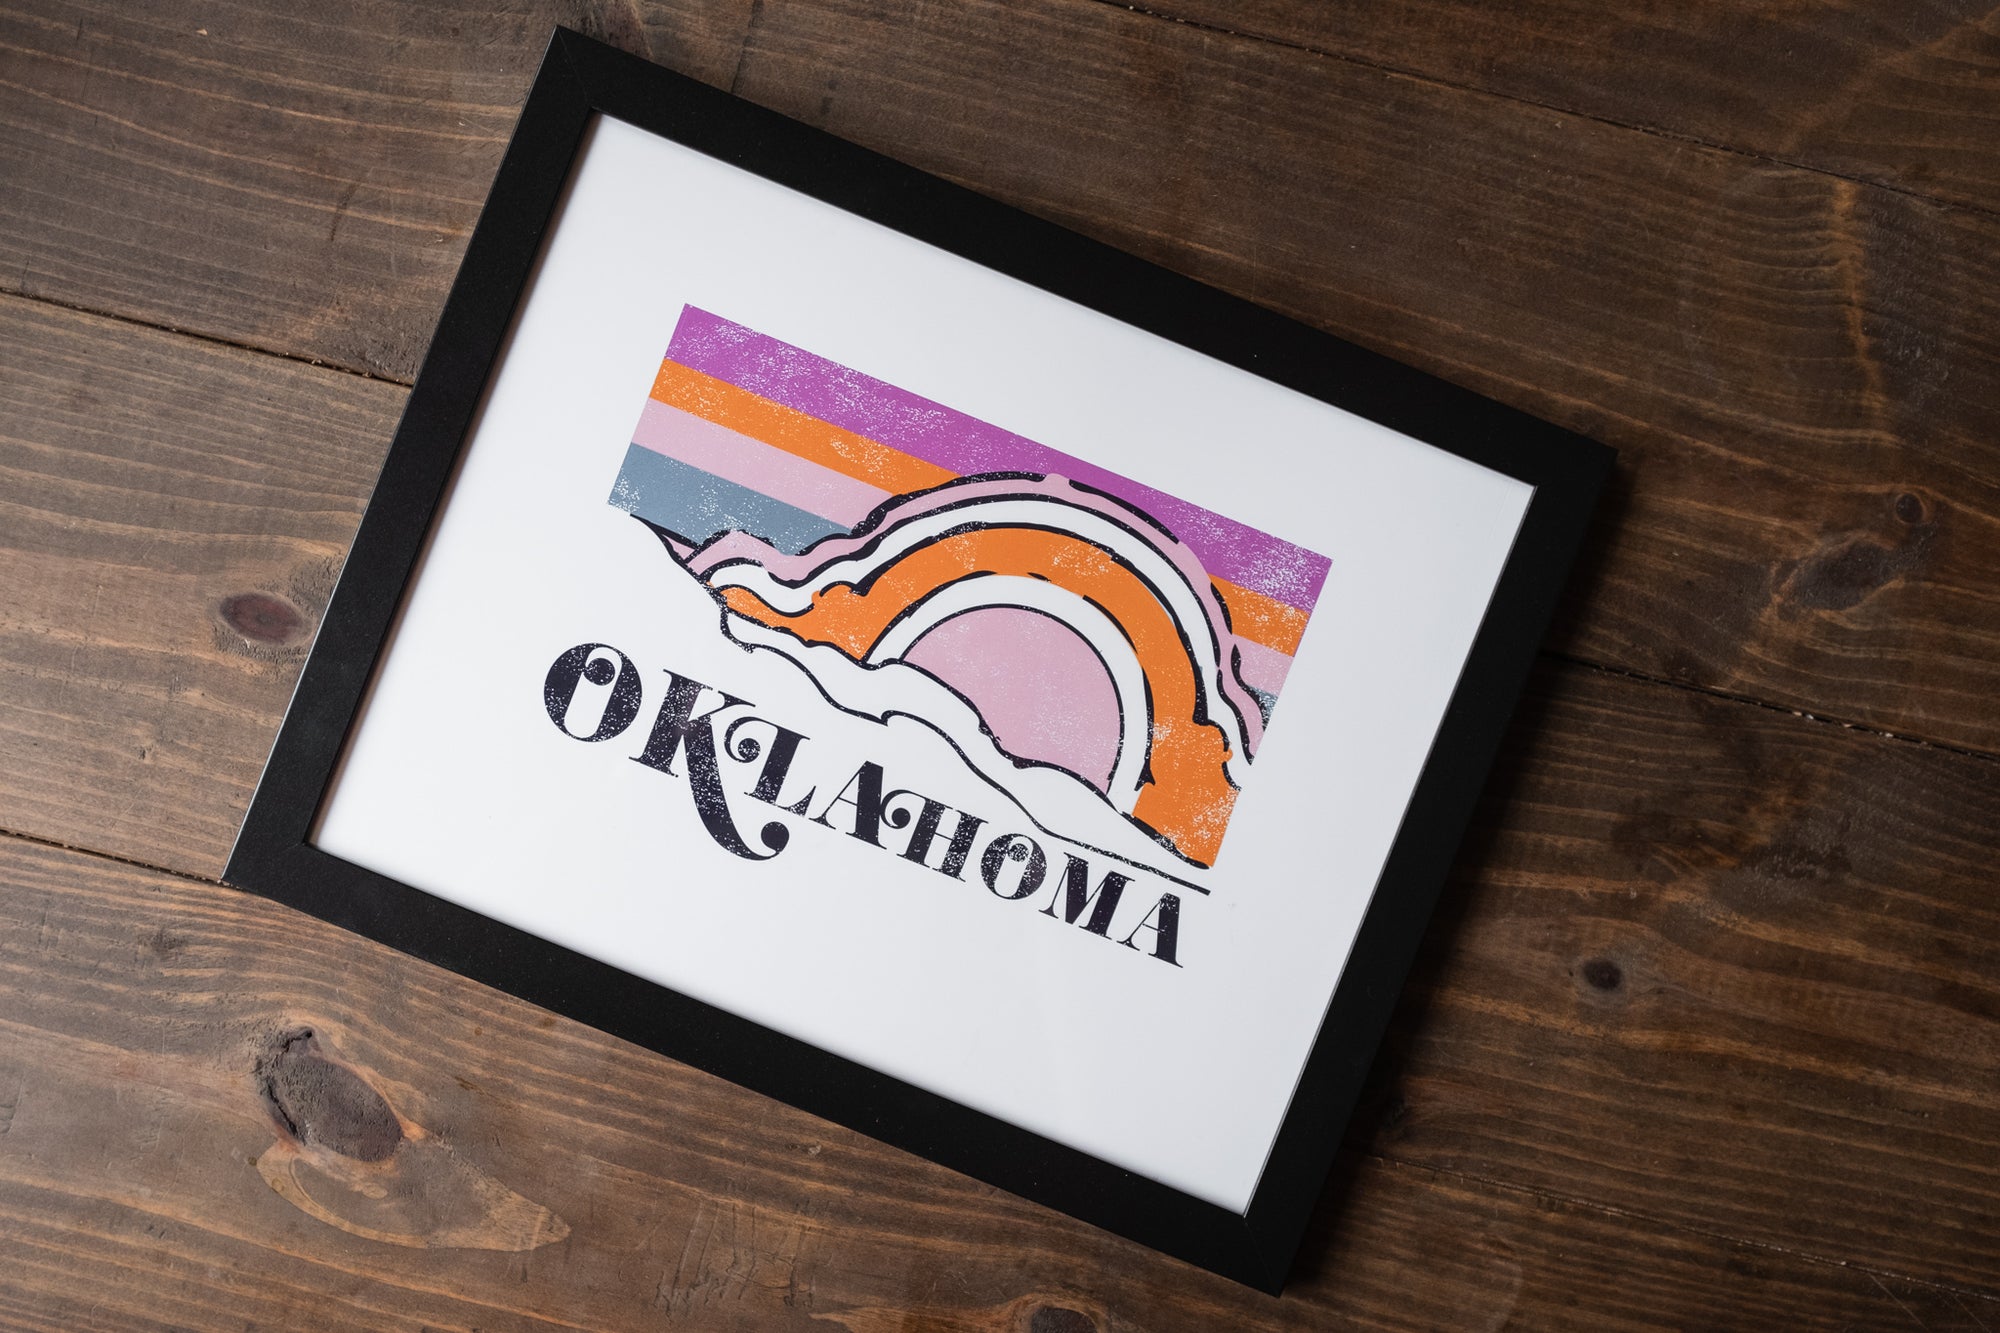 OK sunset print 11 X 14 (unframed) - Trendy Gifts at Lush Fashion Lounge Boutique in Oklahoma City